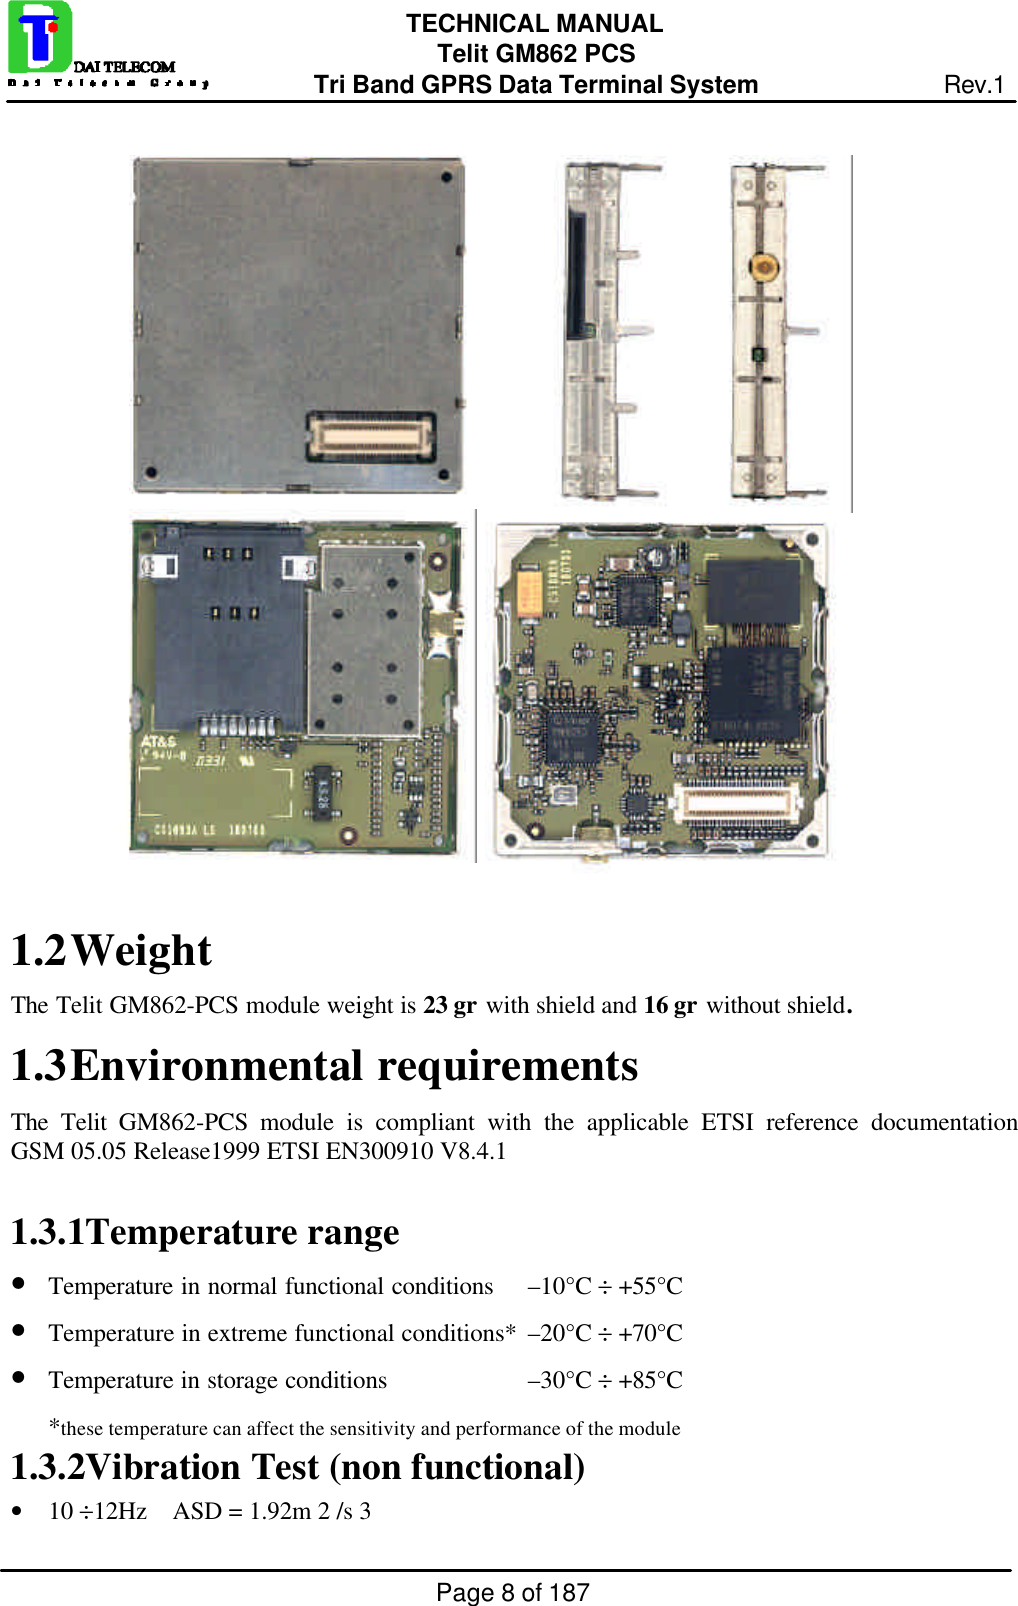 Page 8 of 187TECHNICAL MANUALTelit GM862 PCSTri Band GPRS Data Terminal System Rev.11.2 WeightThe Telit GM862-PCS module weight is 23 gr with shield and 16 gr without shield.1.3 Environmental requirementsThe  Telit GM862-PCS module is compliant with the applicable ETSI reference documentationGSM 05.05 Release1999 ETSI EN300910 V8.4.11.3.1 Temperature range• Temperature in normal functional conditions –10°C ÷ +55°C• Temperature in extreme functional conditions* –20°C ÷ +70°C• Temperature in storage conditions –30°C ÷ +85°C*these temperature can affect the sensitivity and performance of the module1.3.2 Vibration Test (non functional)• 10 ÷12Hz    ASD = 1.92m 2 /s 3